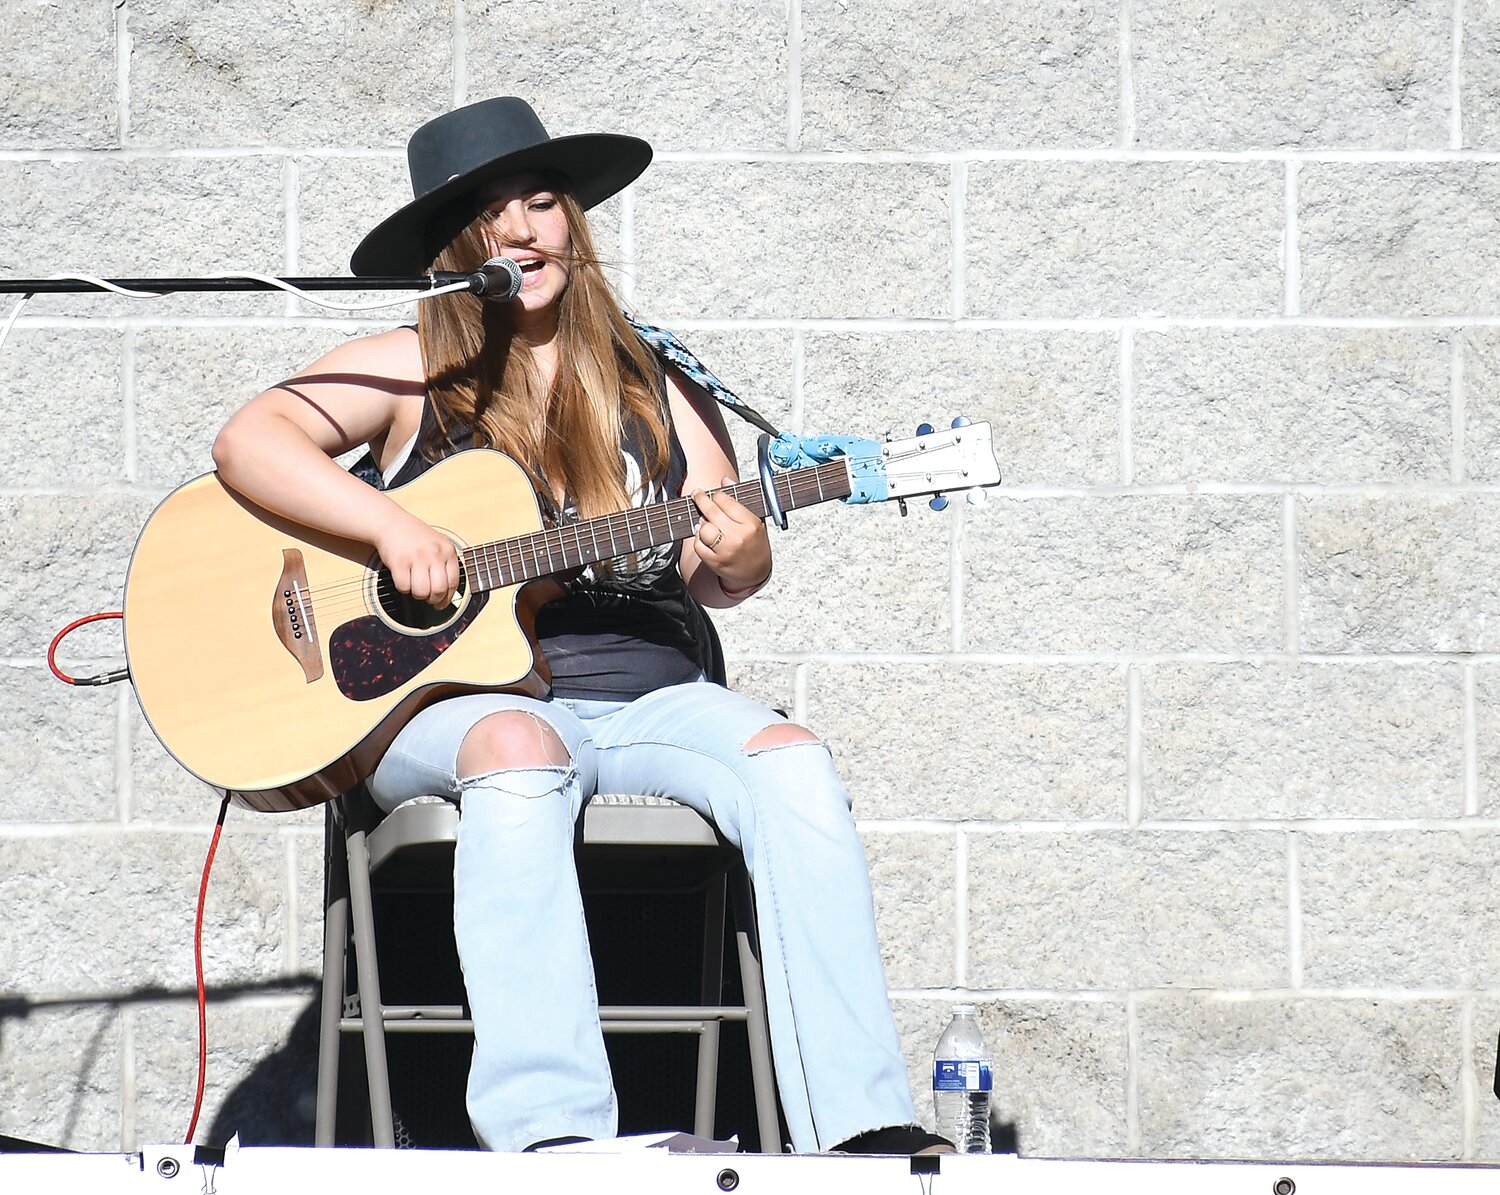 Lyman hosts a singer-songwriter competition